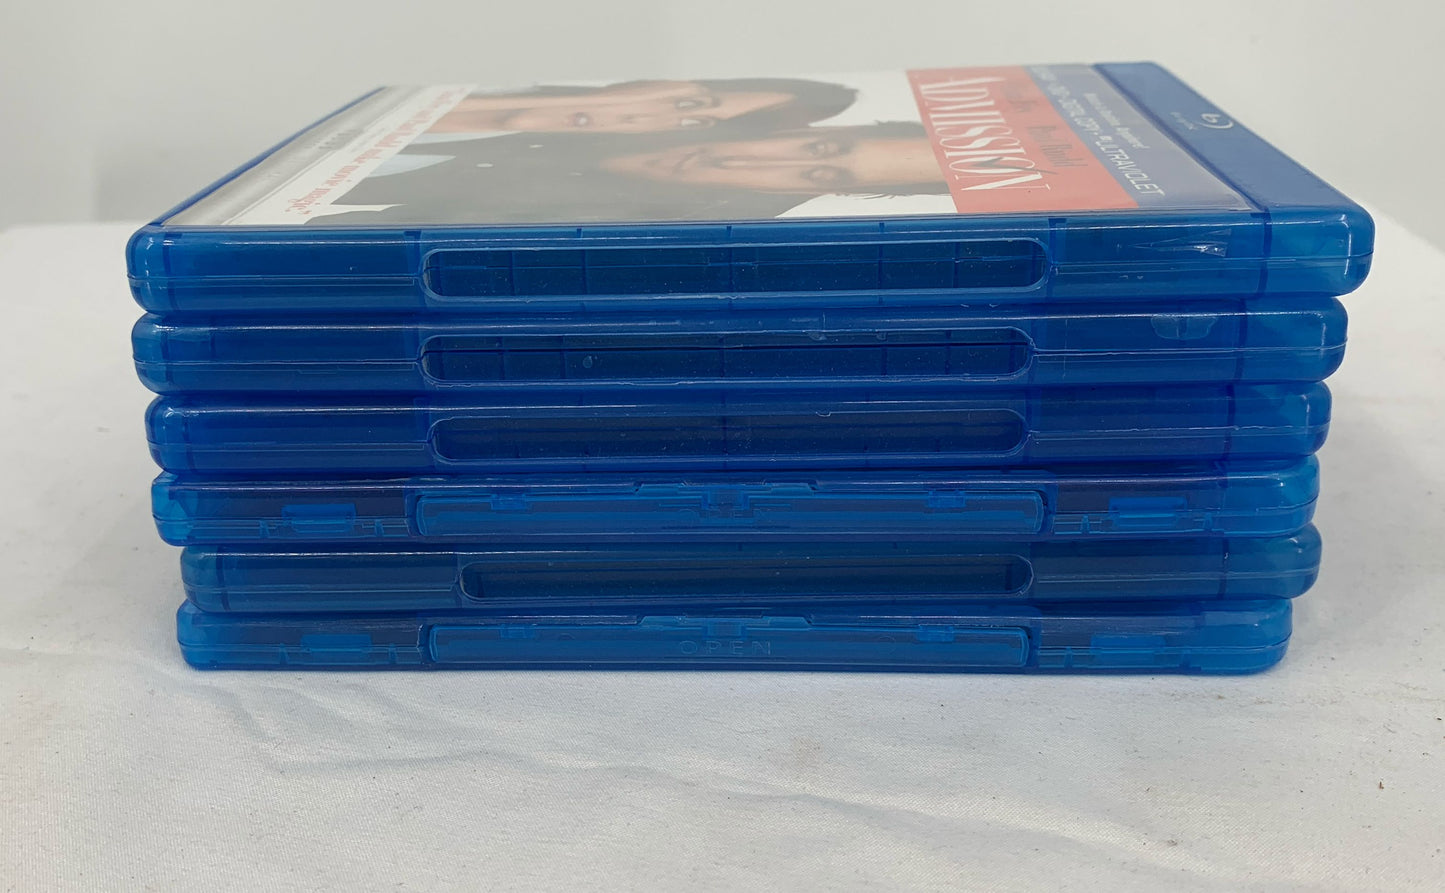 Various Titles Comedy Movies Lot Of 6-Blu Ray DVD's